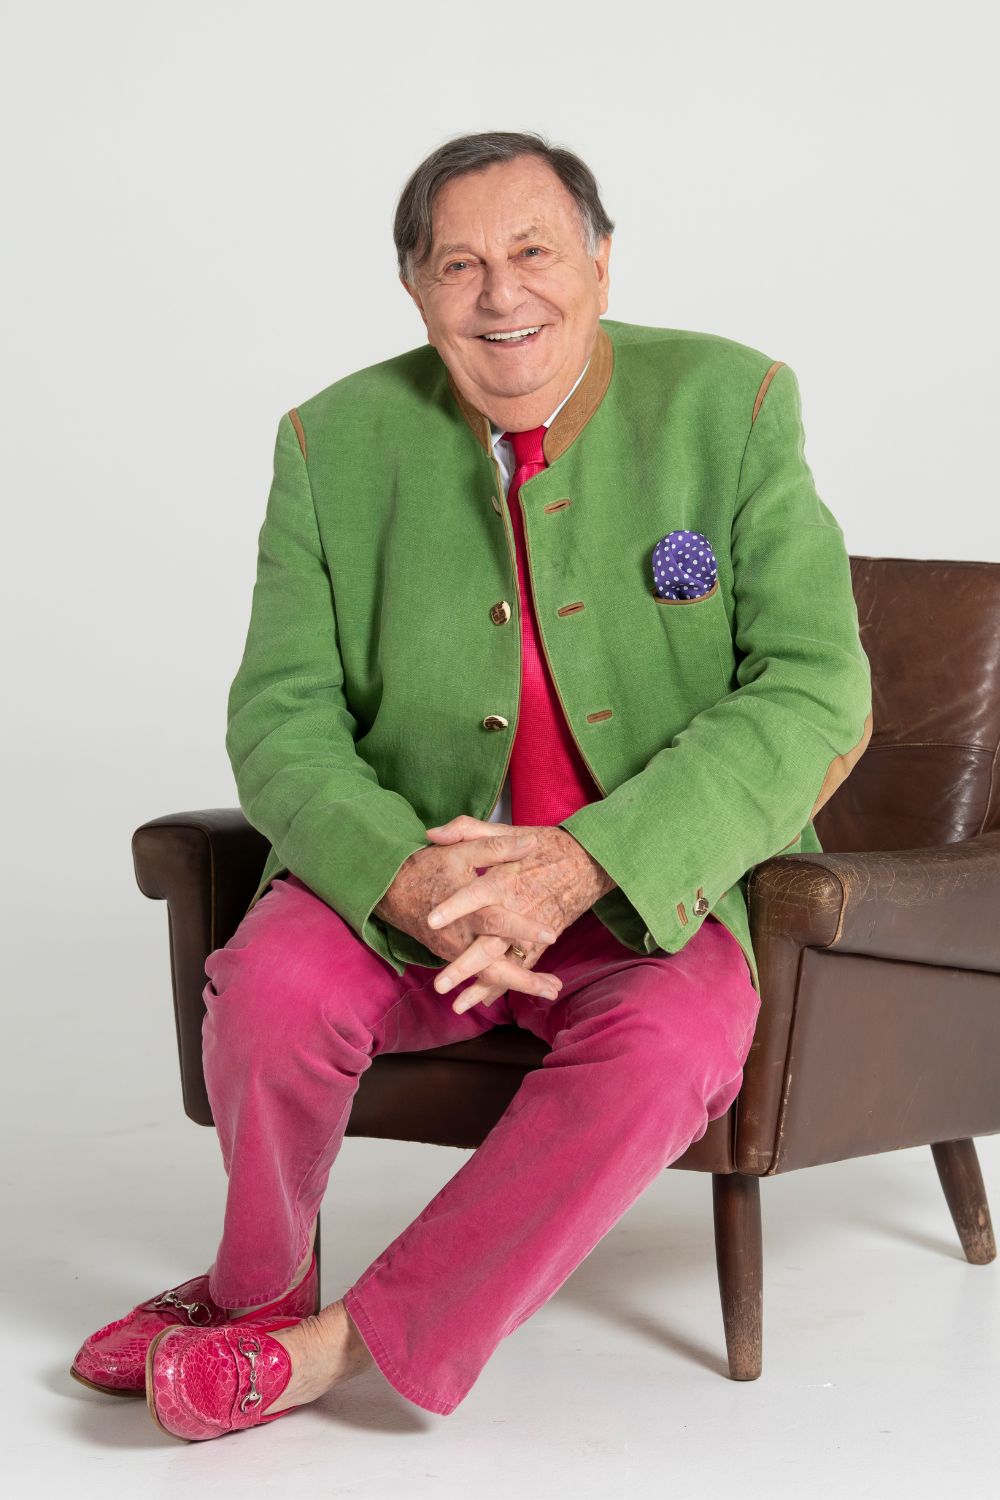 barry-humphries-sitting-in-leather-chair-in-green-blazer-and-pink-trousers-smiling